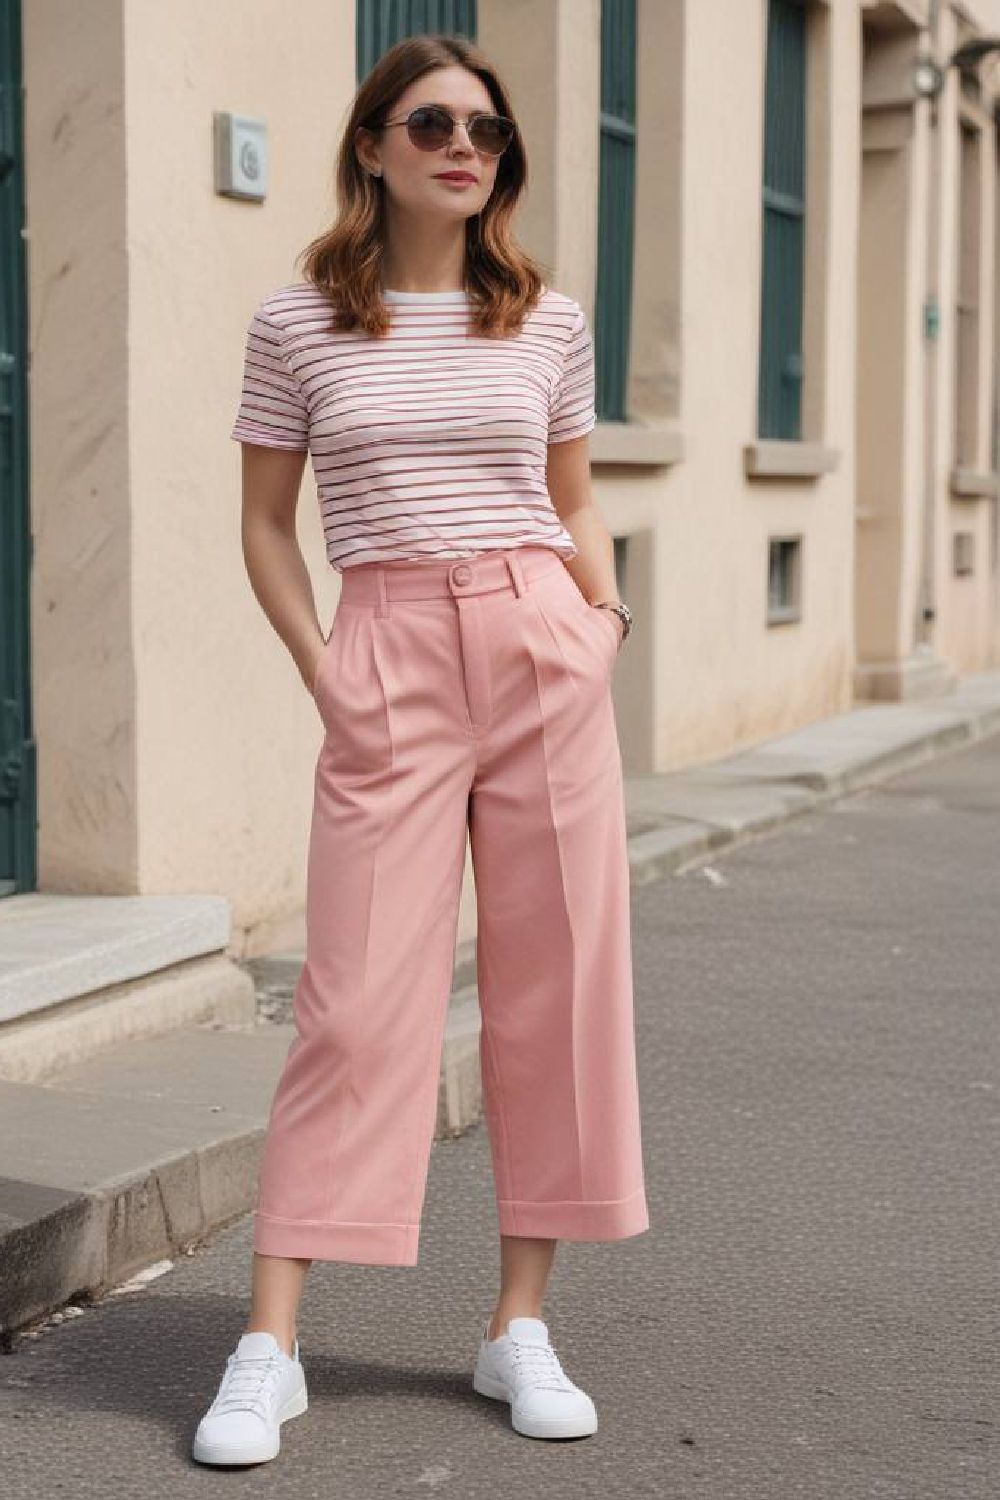 stylish salmon pink culottes and striped tee